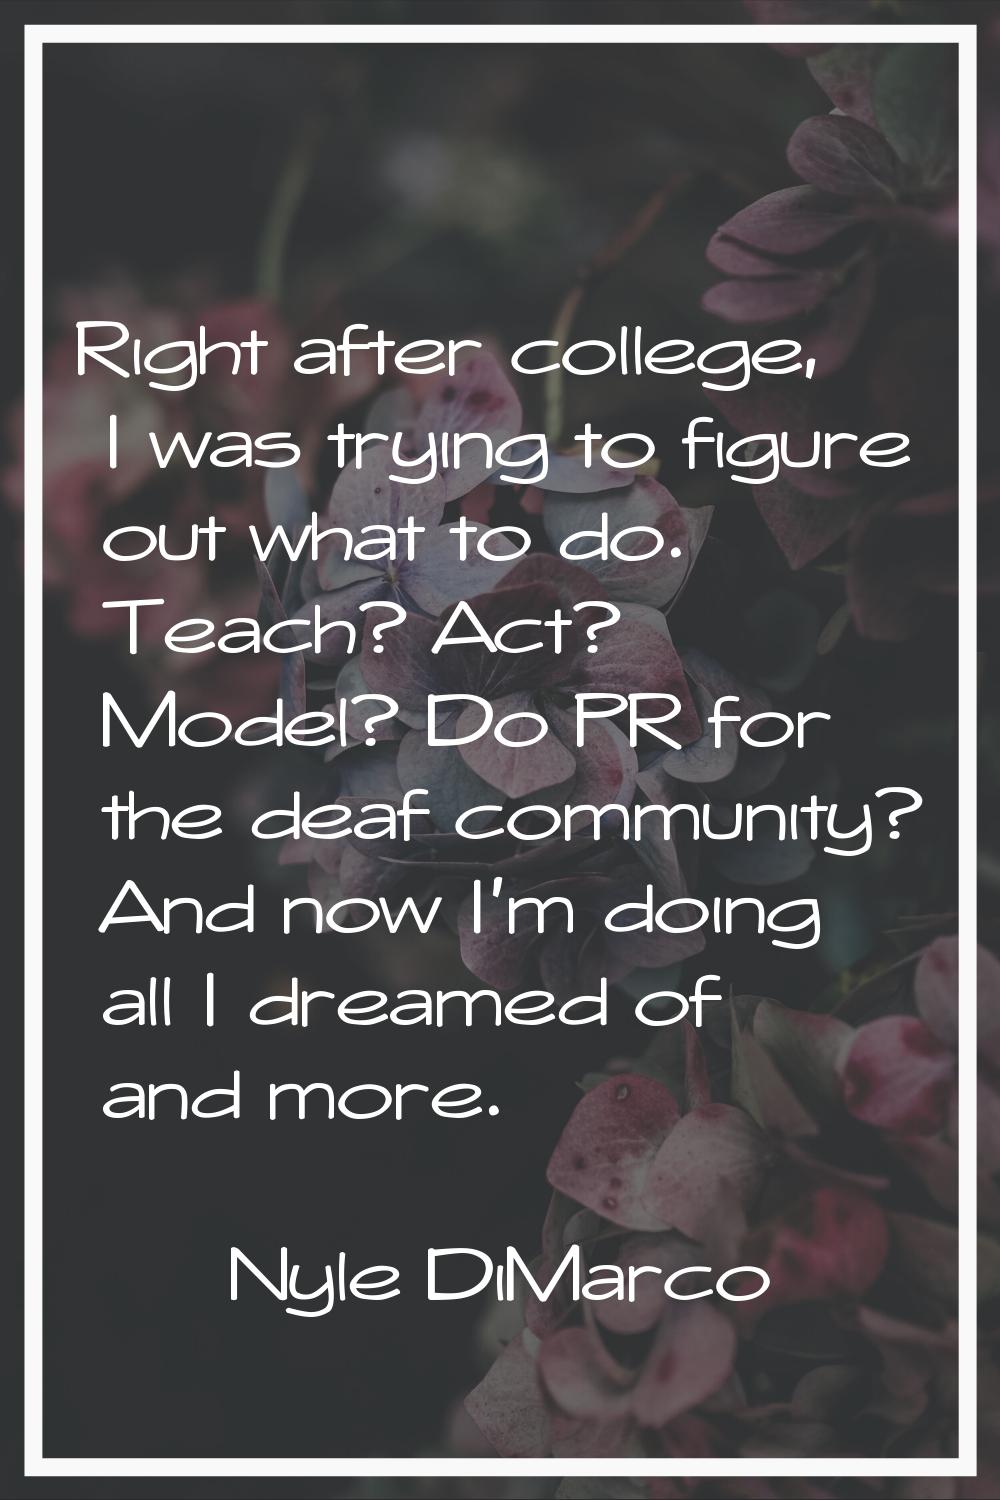 Right after college, I was trying to figure out what to do. Teach? Act? Model? Do PR for the deaf c